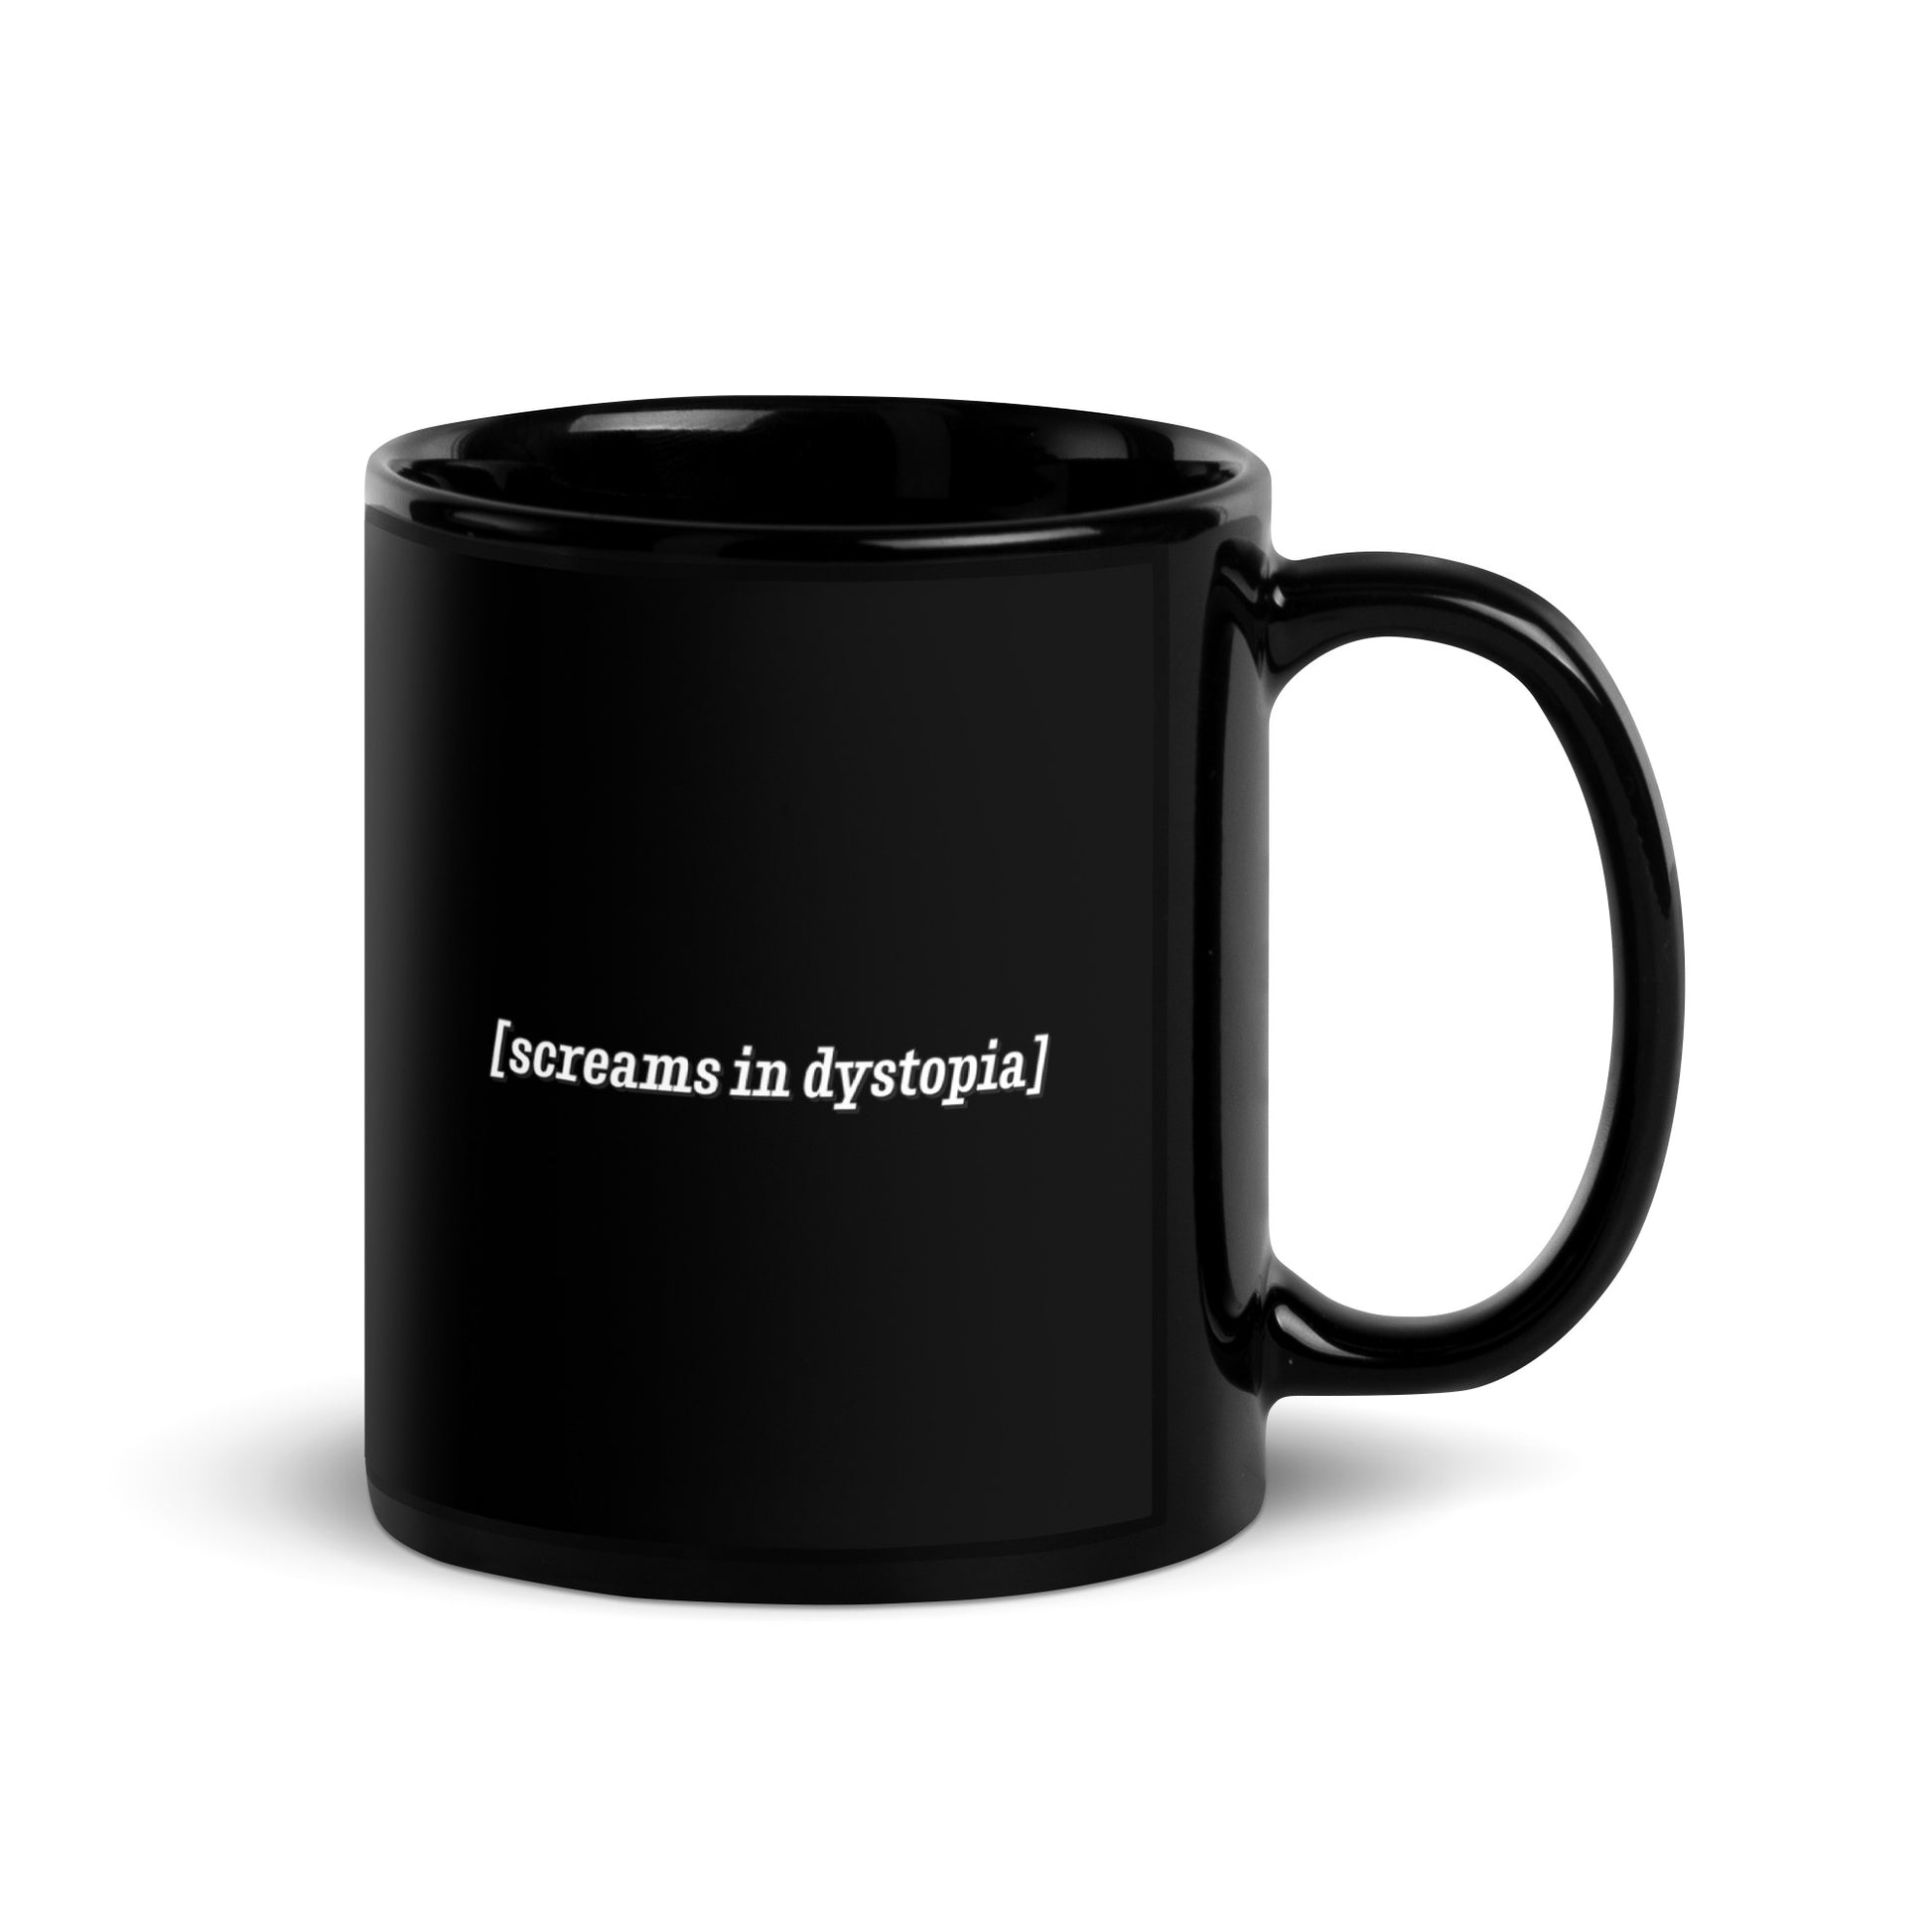 A black 11 ounce coffee mug with white text in the style of subtitles. The text reads "[screams in dystopia]".